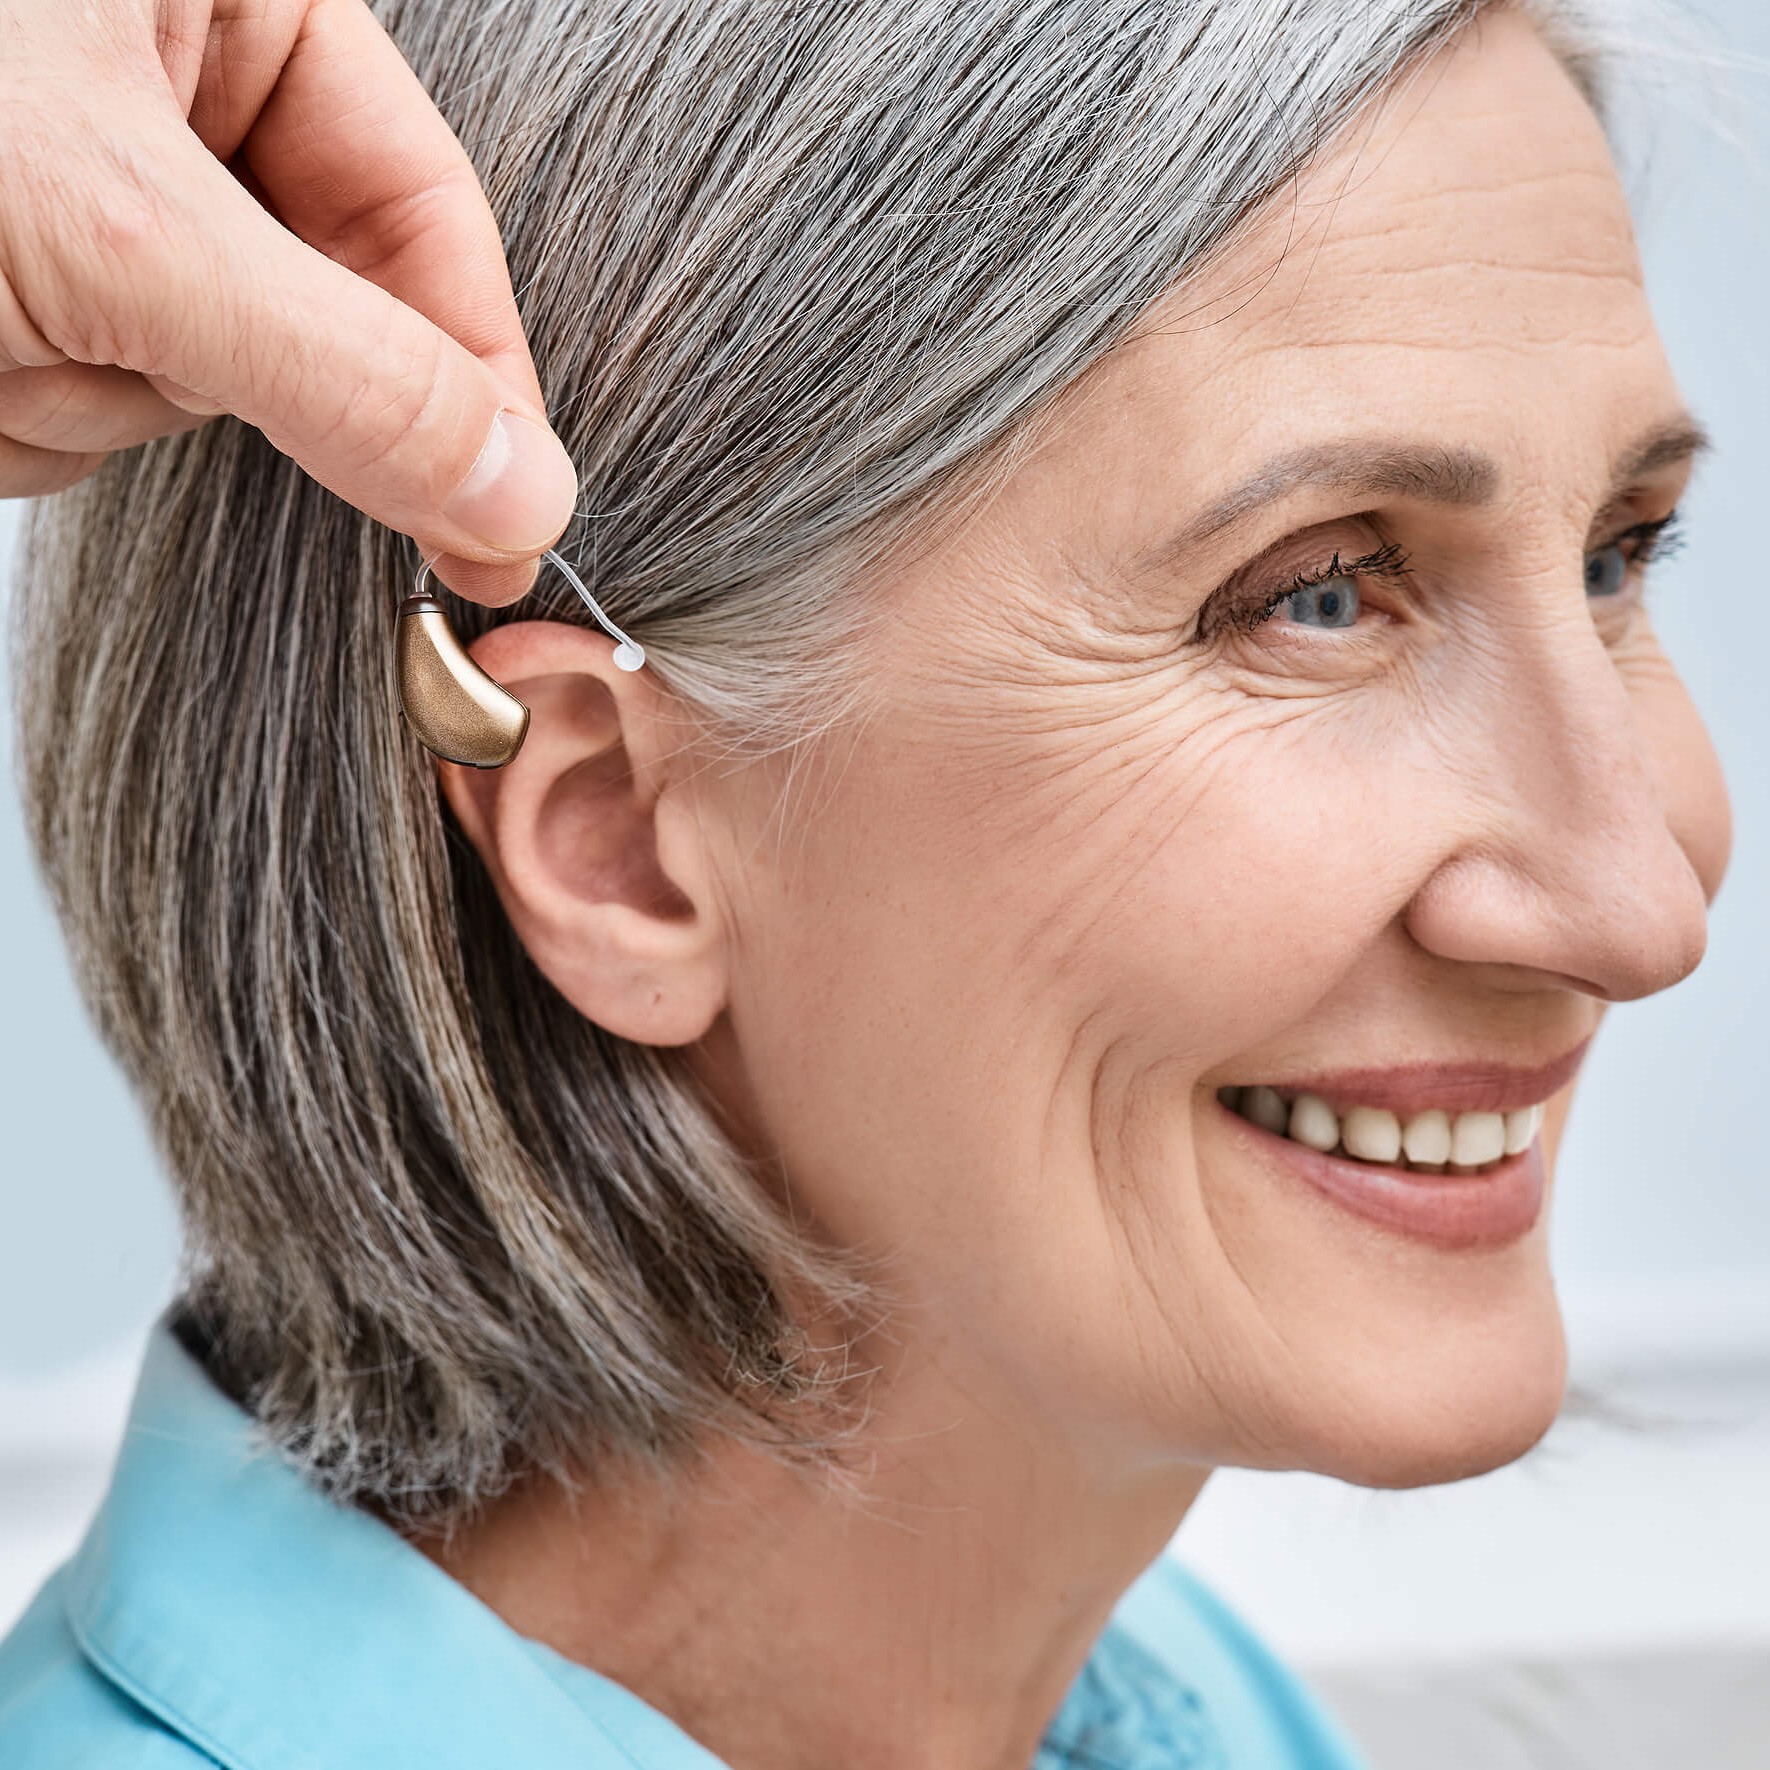 Audiologist holding hearing aid by female patient's ear